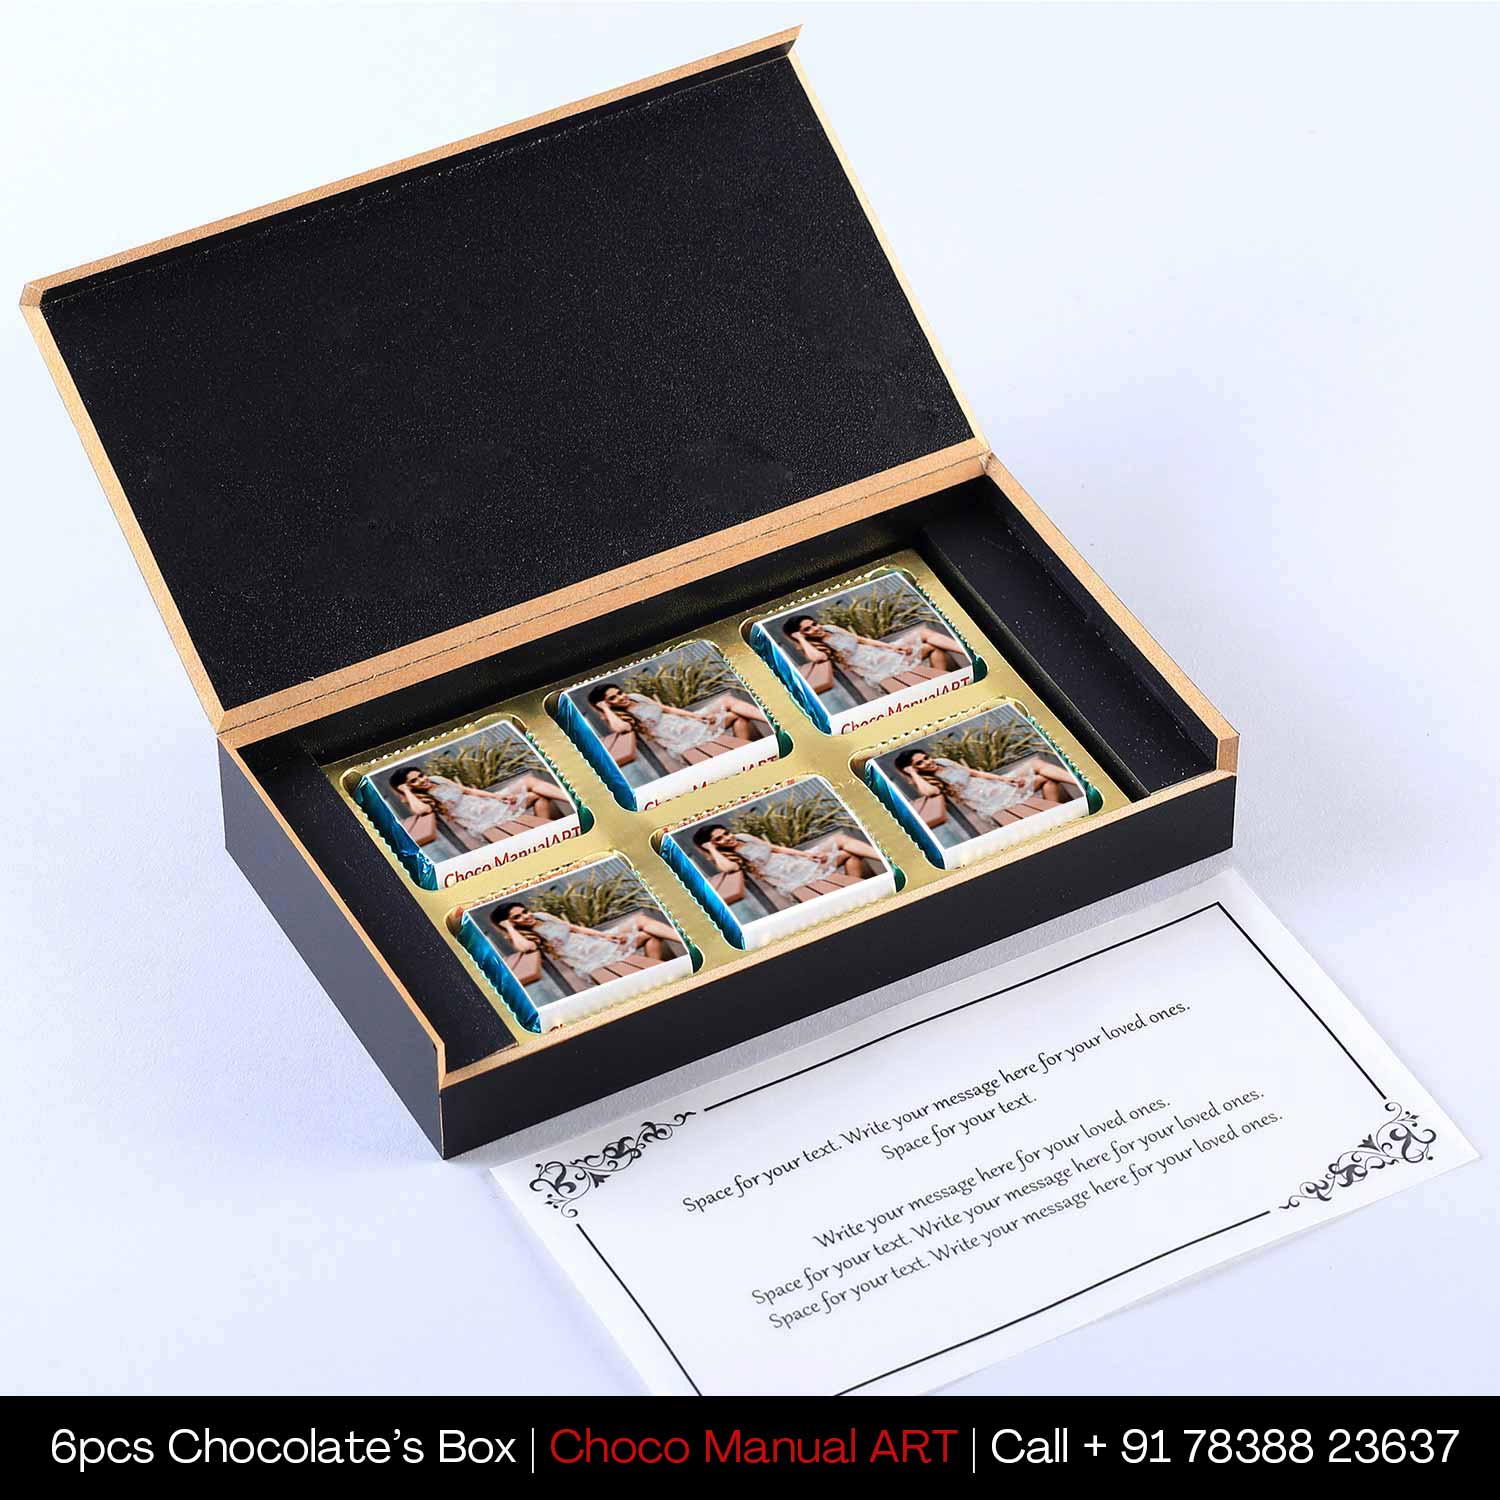 Unique Gift idea to say sorry chocolate box with Image and name printed I Delicious chocolates I Wooden box